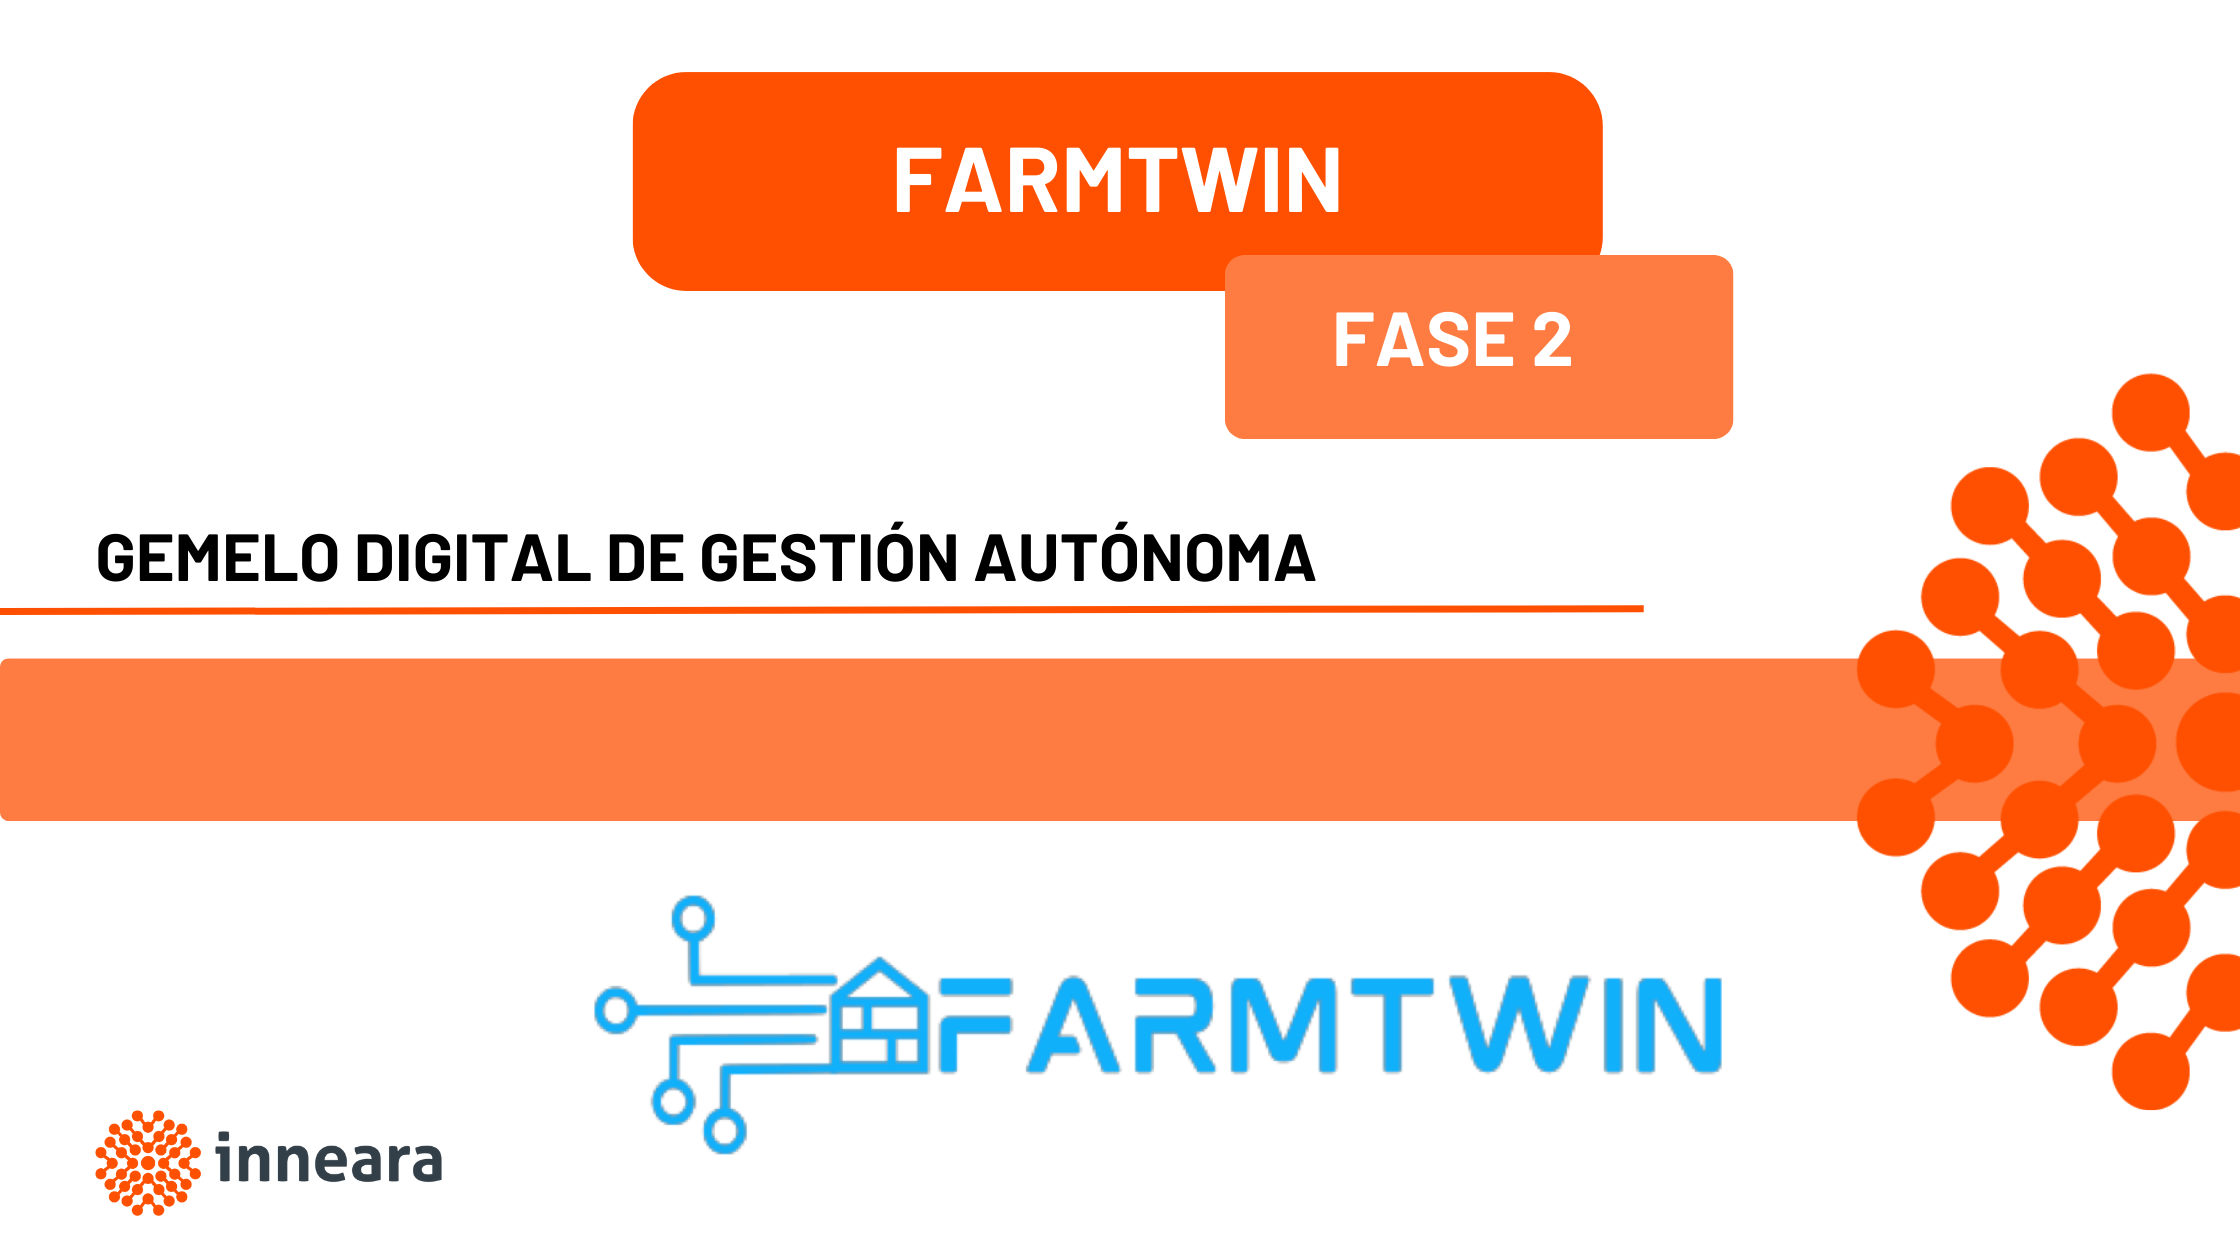 PROYECTO FARMTWIN FASE 2